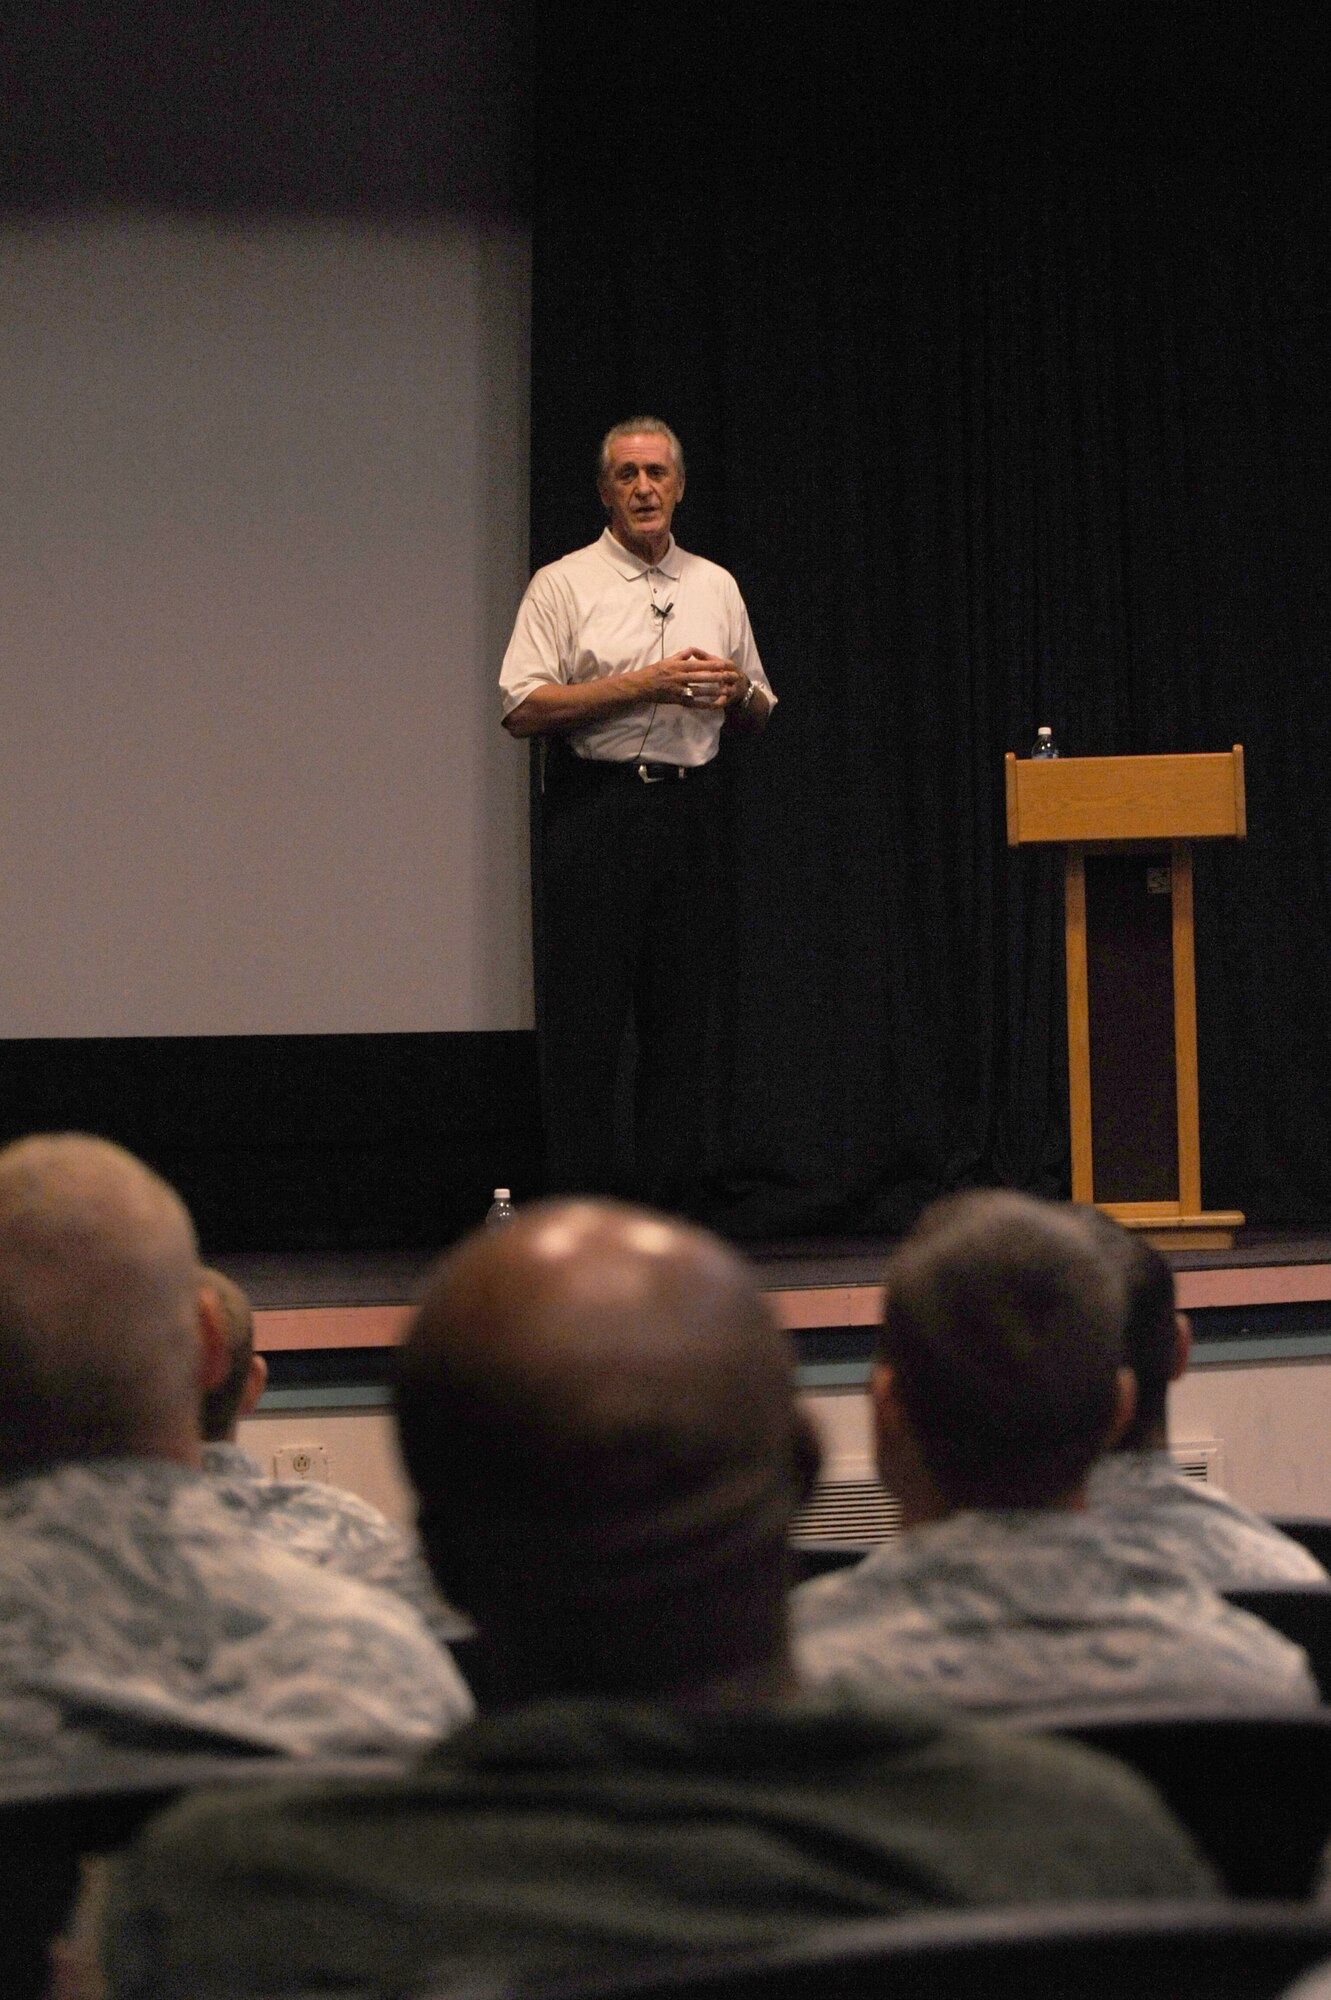 Pat Riley, Miami HEAT president, speaks to U.S. Air Force members at the Commando Auditorium during the team's 2010 Training Camp on Hurlburt Field, Fla., Sept. 29, 2010. Mr. Riley spoke to the Airmen about the importance of leadership. (DoD photo by U.S. Air Force Airman 1st Class Caitlin O'Neil-McKeown/RELEASED)


